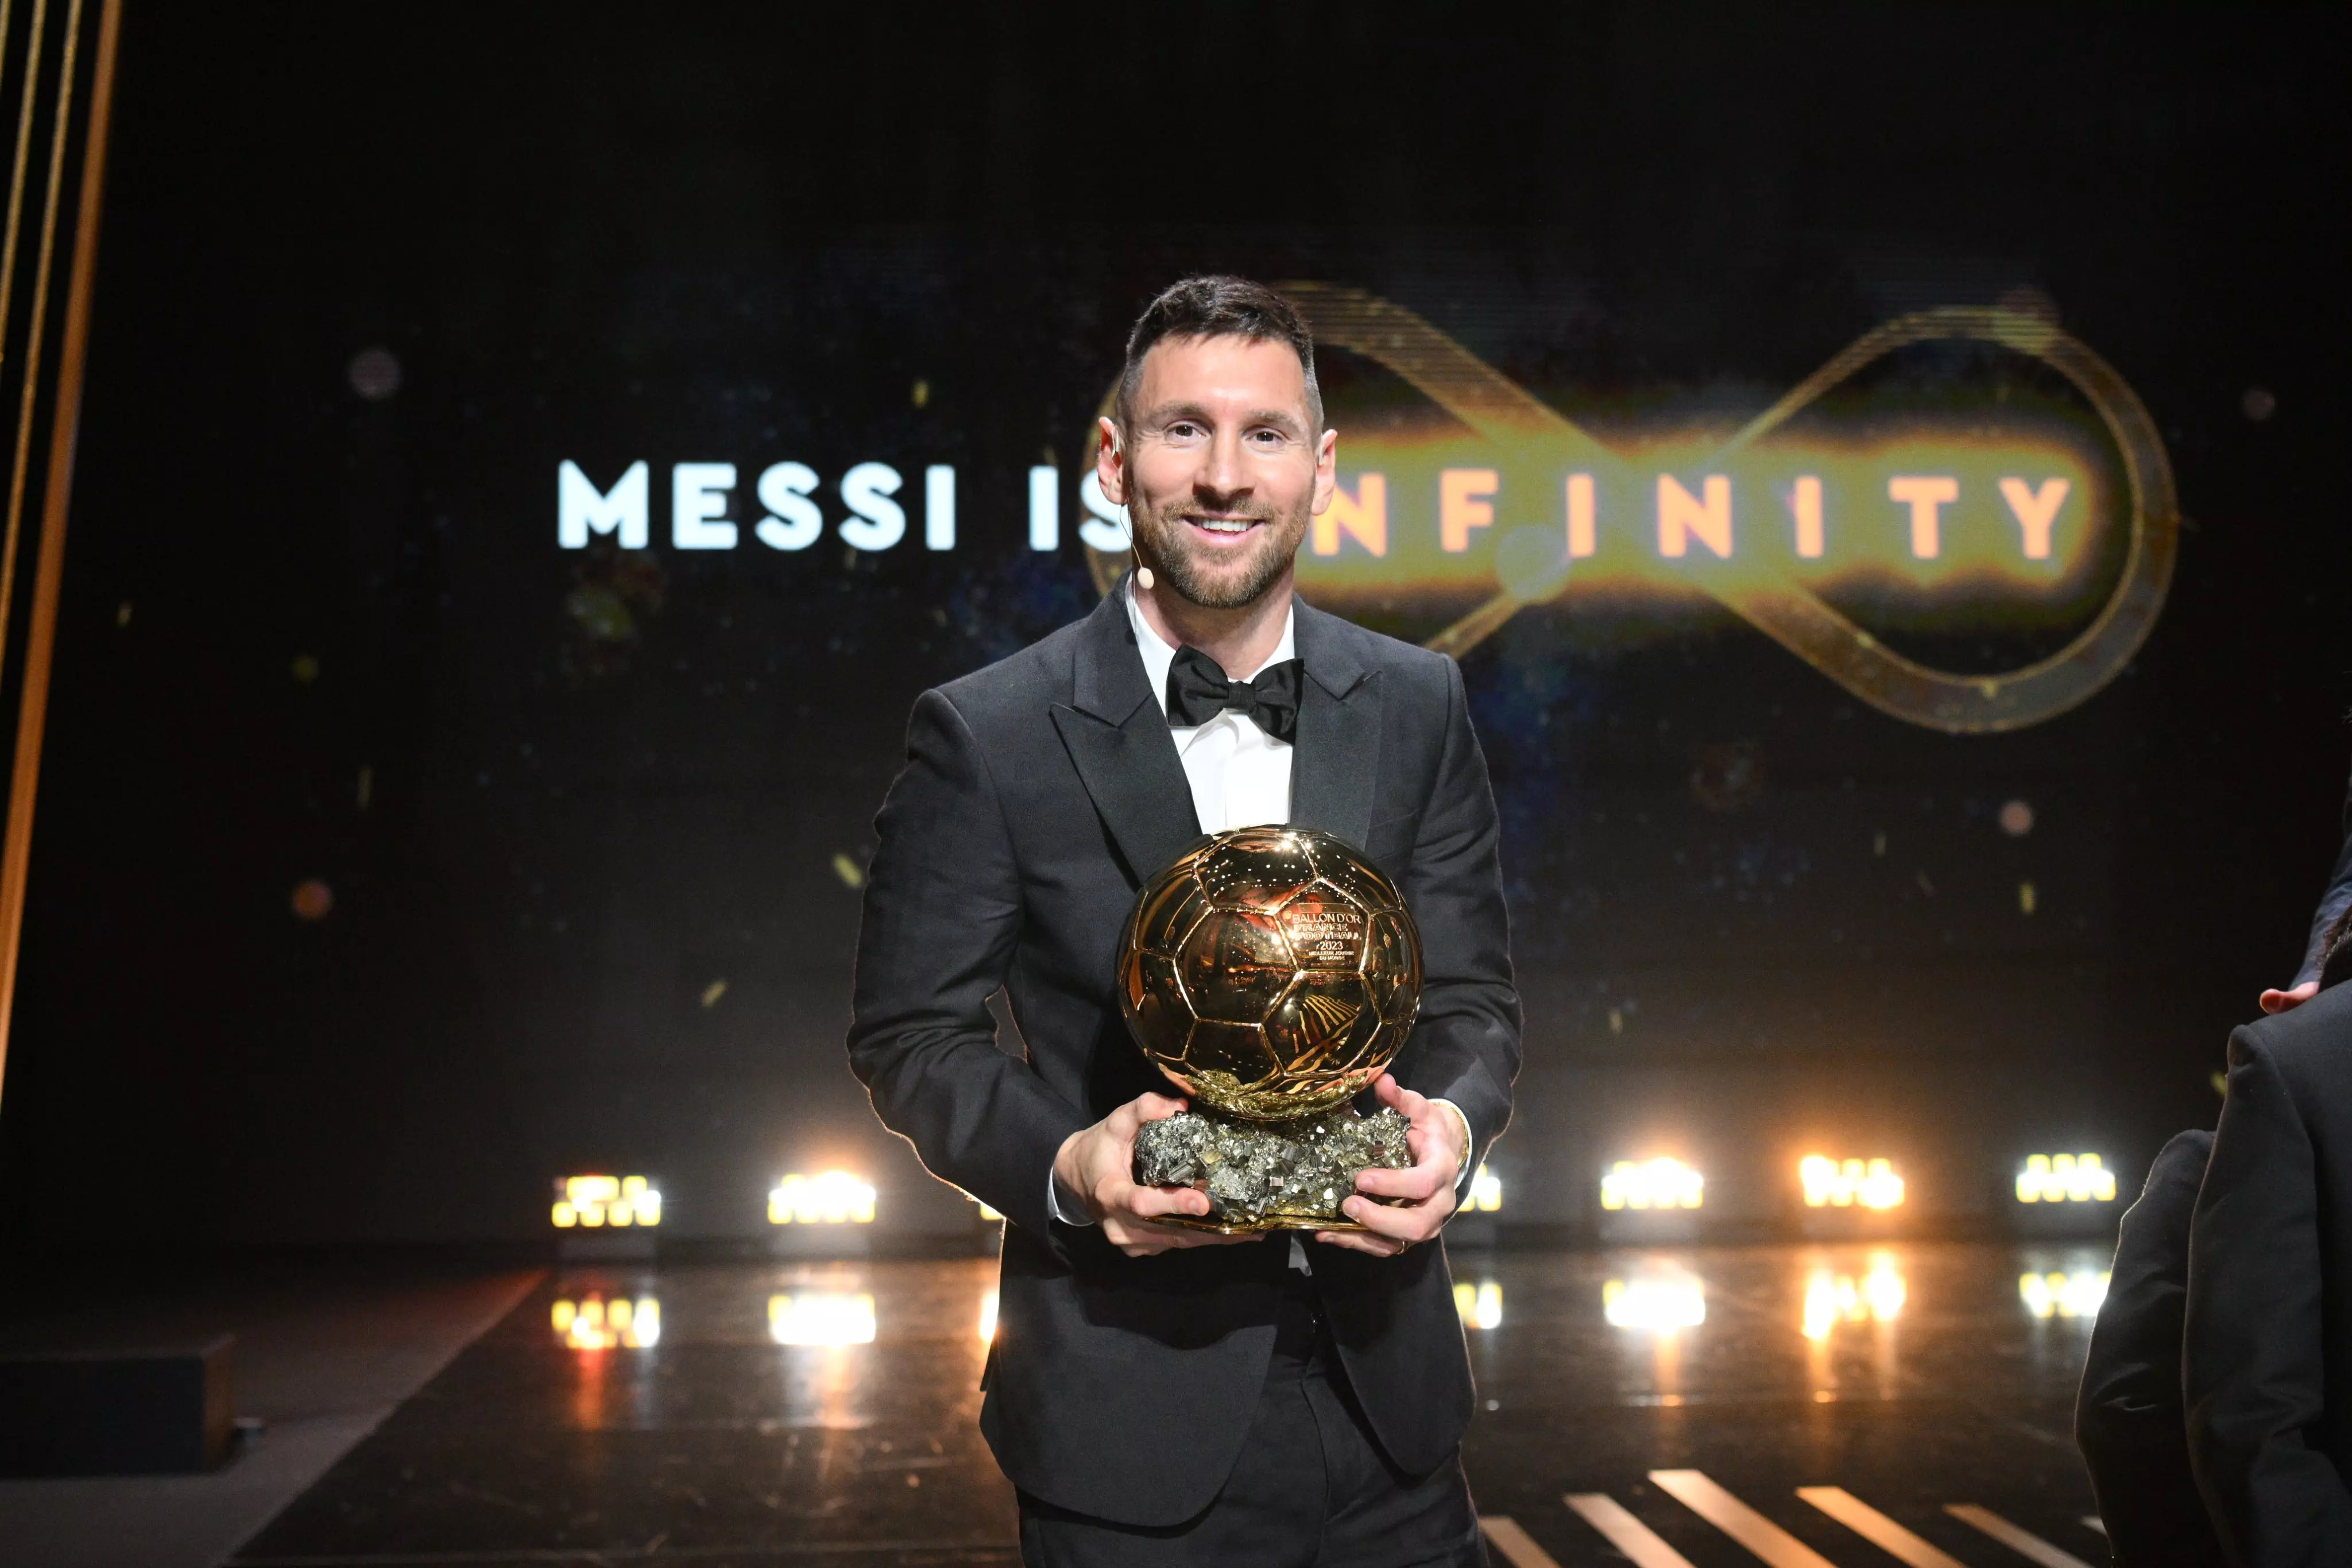 Messi’s Ballon d’Or journey: From Barca rookie to Argentina world champ